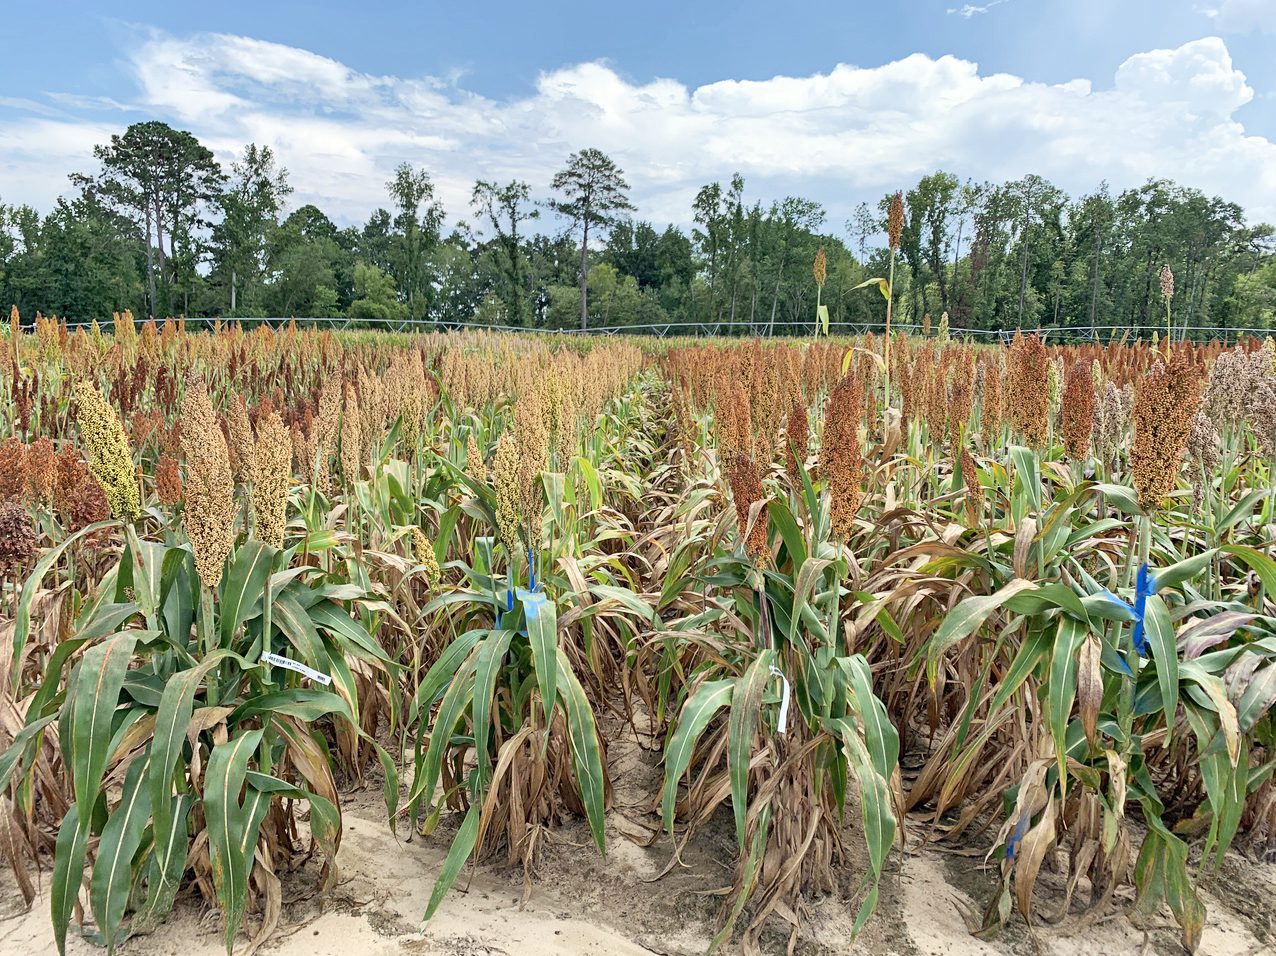 Grain sorghum is shown in a field at Clemson's Pee Dee research station.